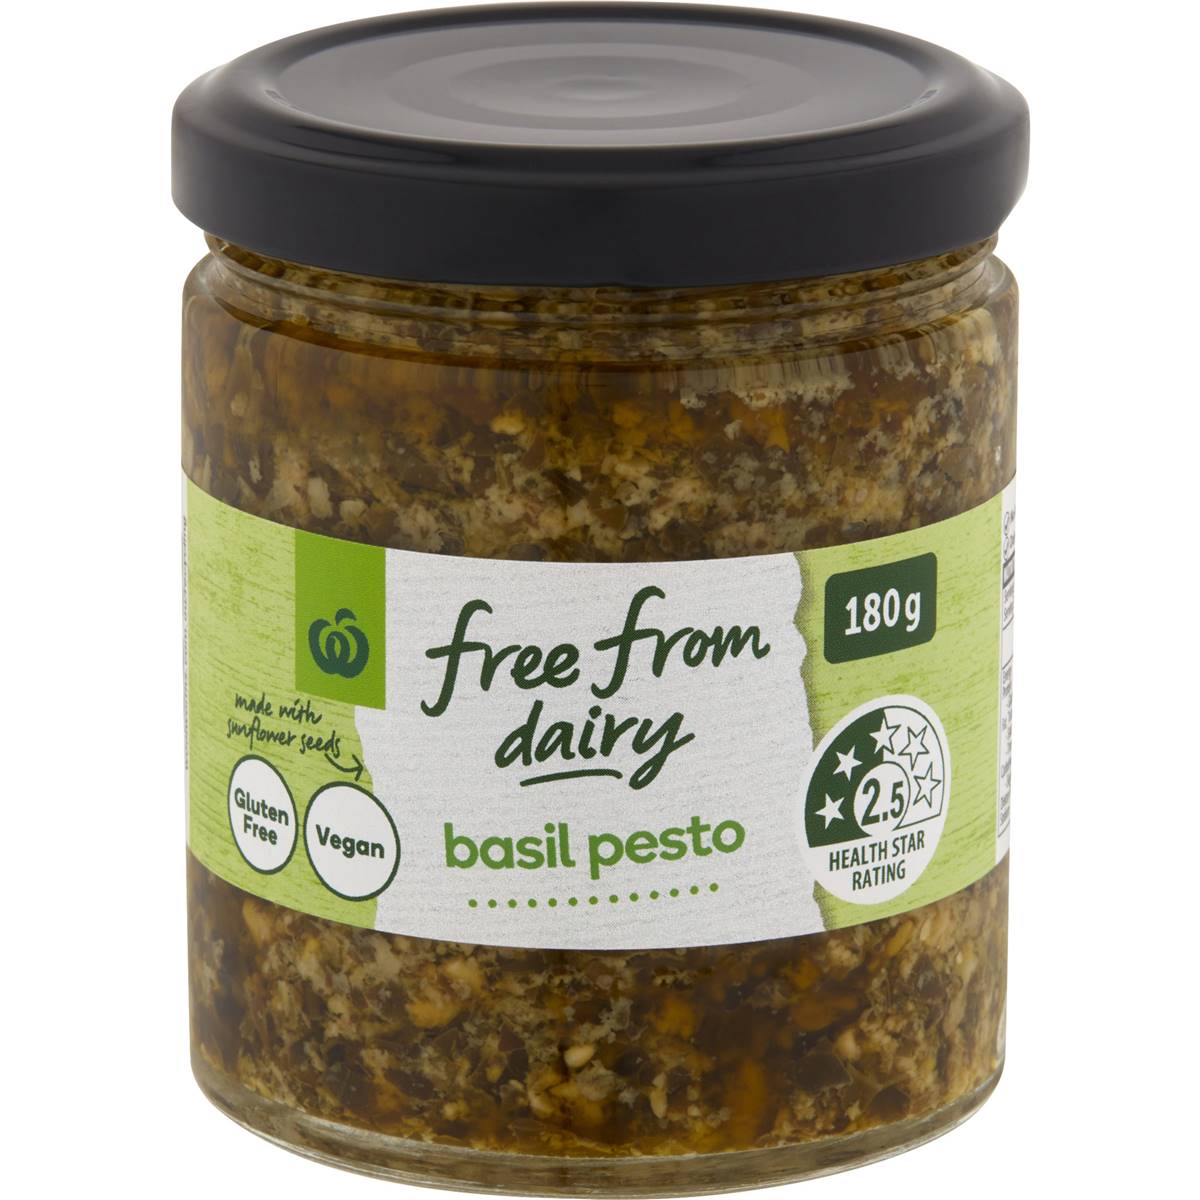 Calories in Woolworths Free From Dairy Basil Pesto